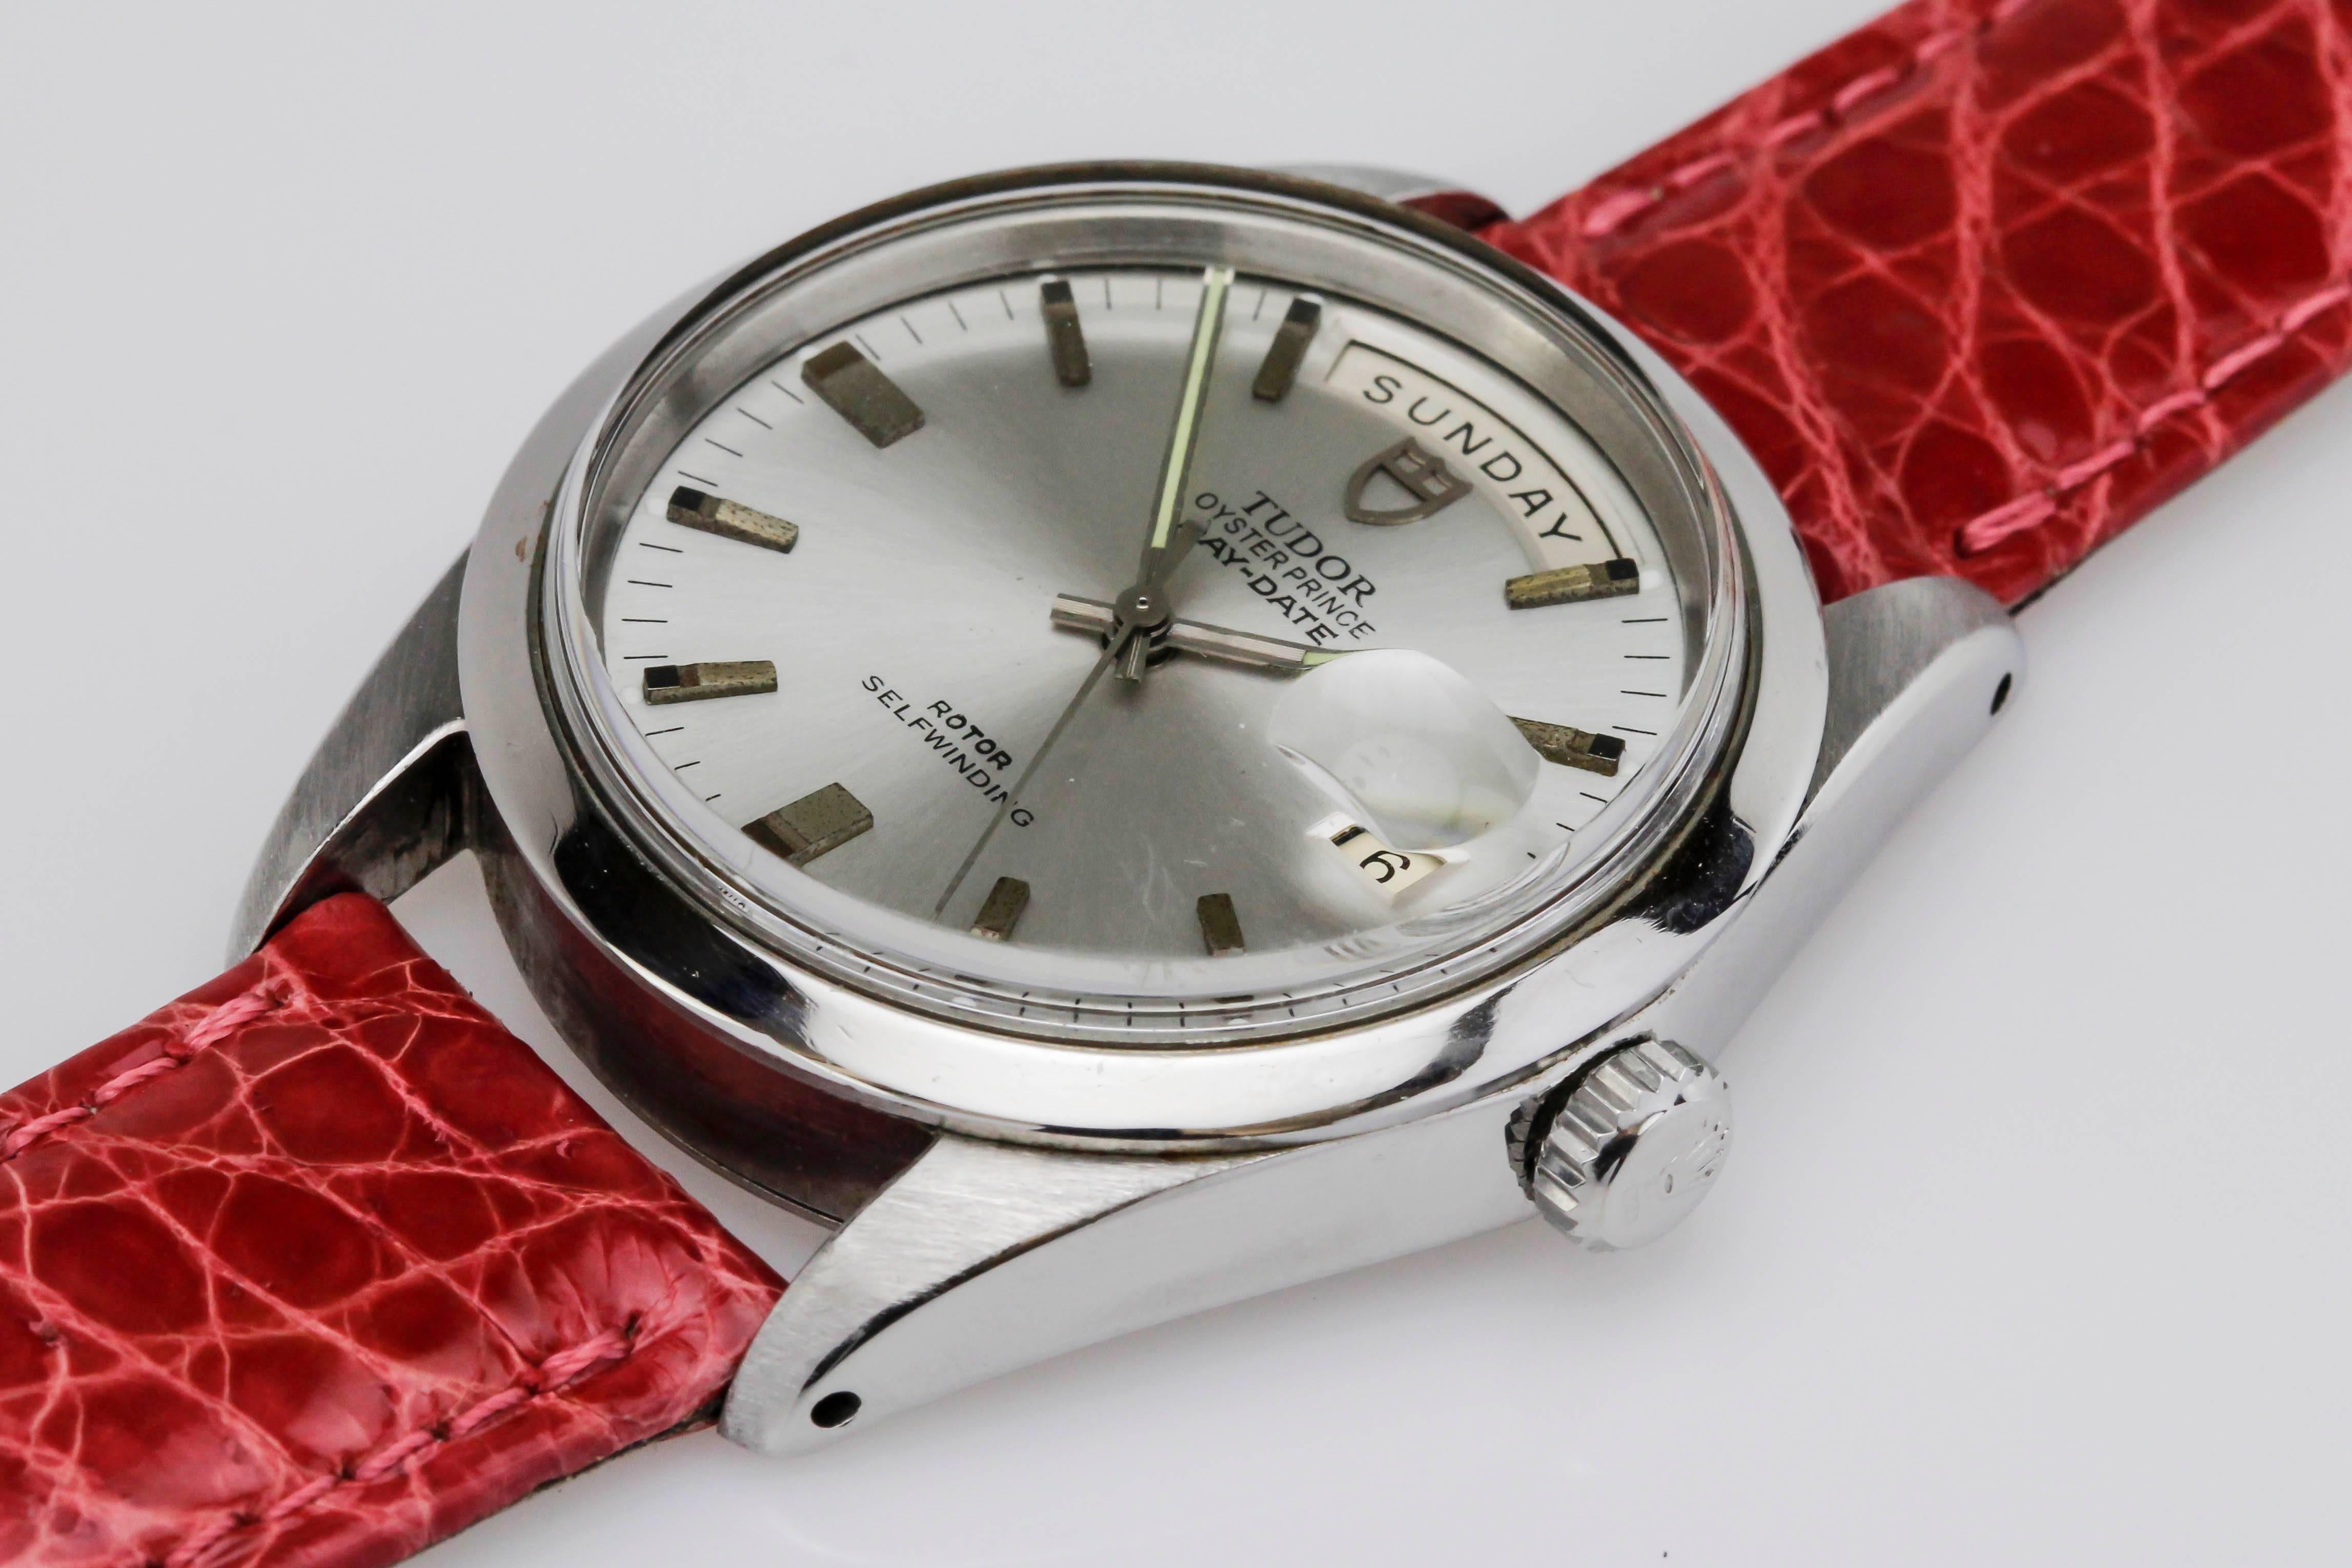 Tudor Oyster Prince Day-Date in stainless steel with English day wheel. Comes with Tudor box.